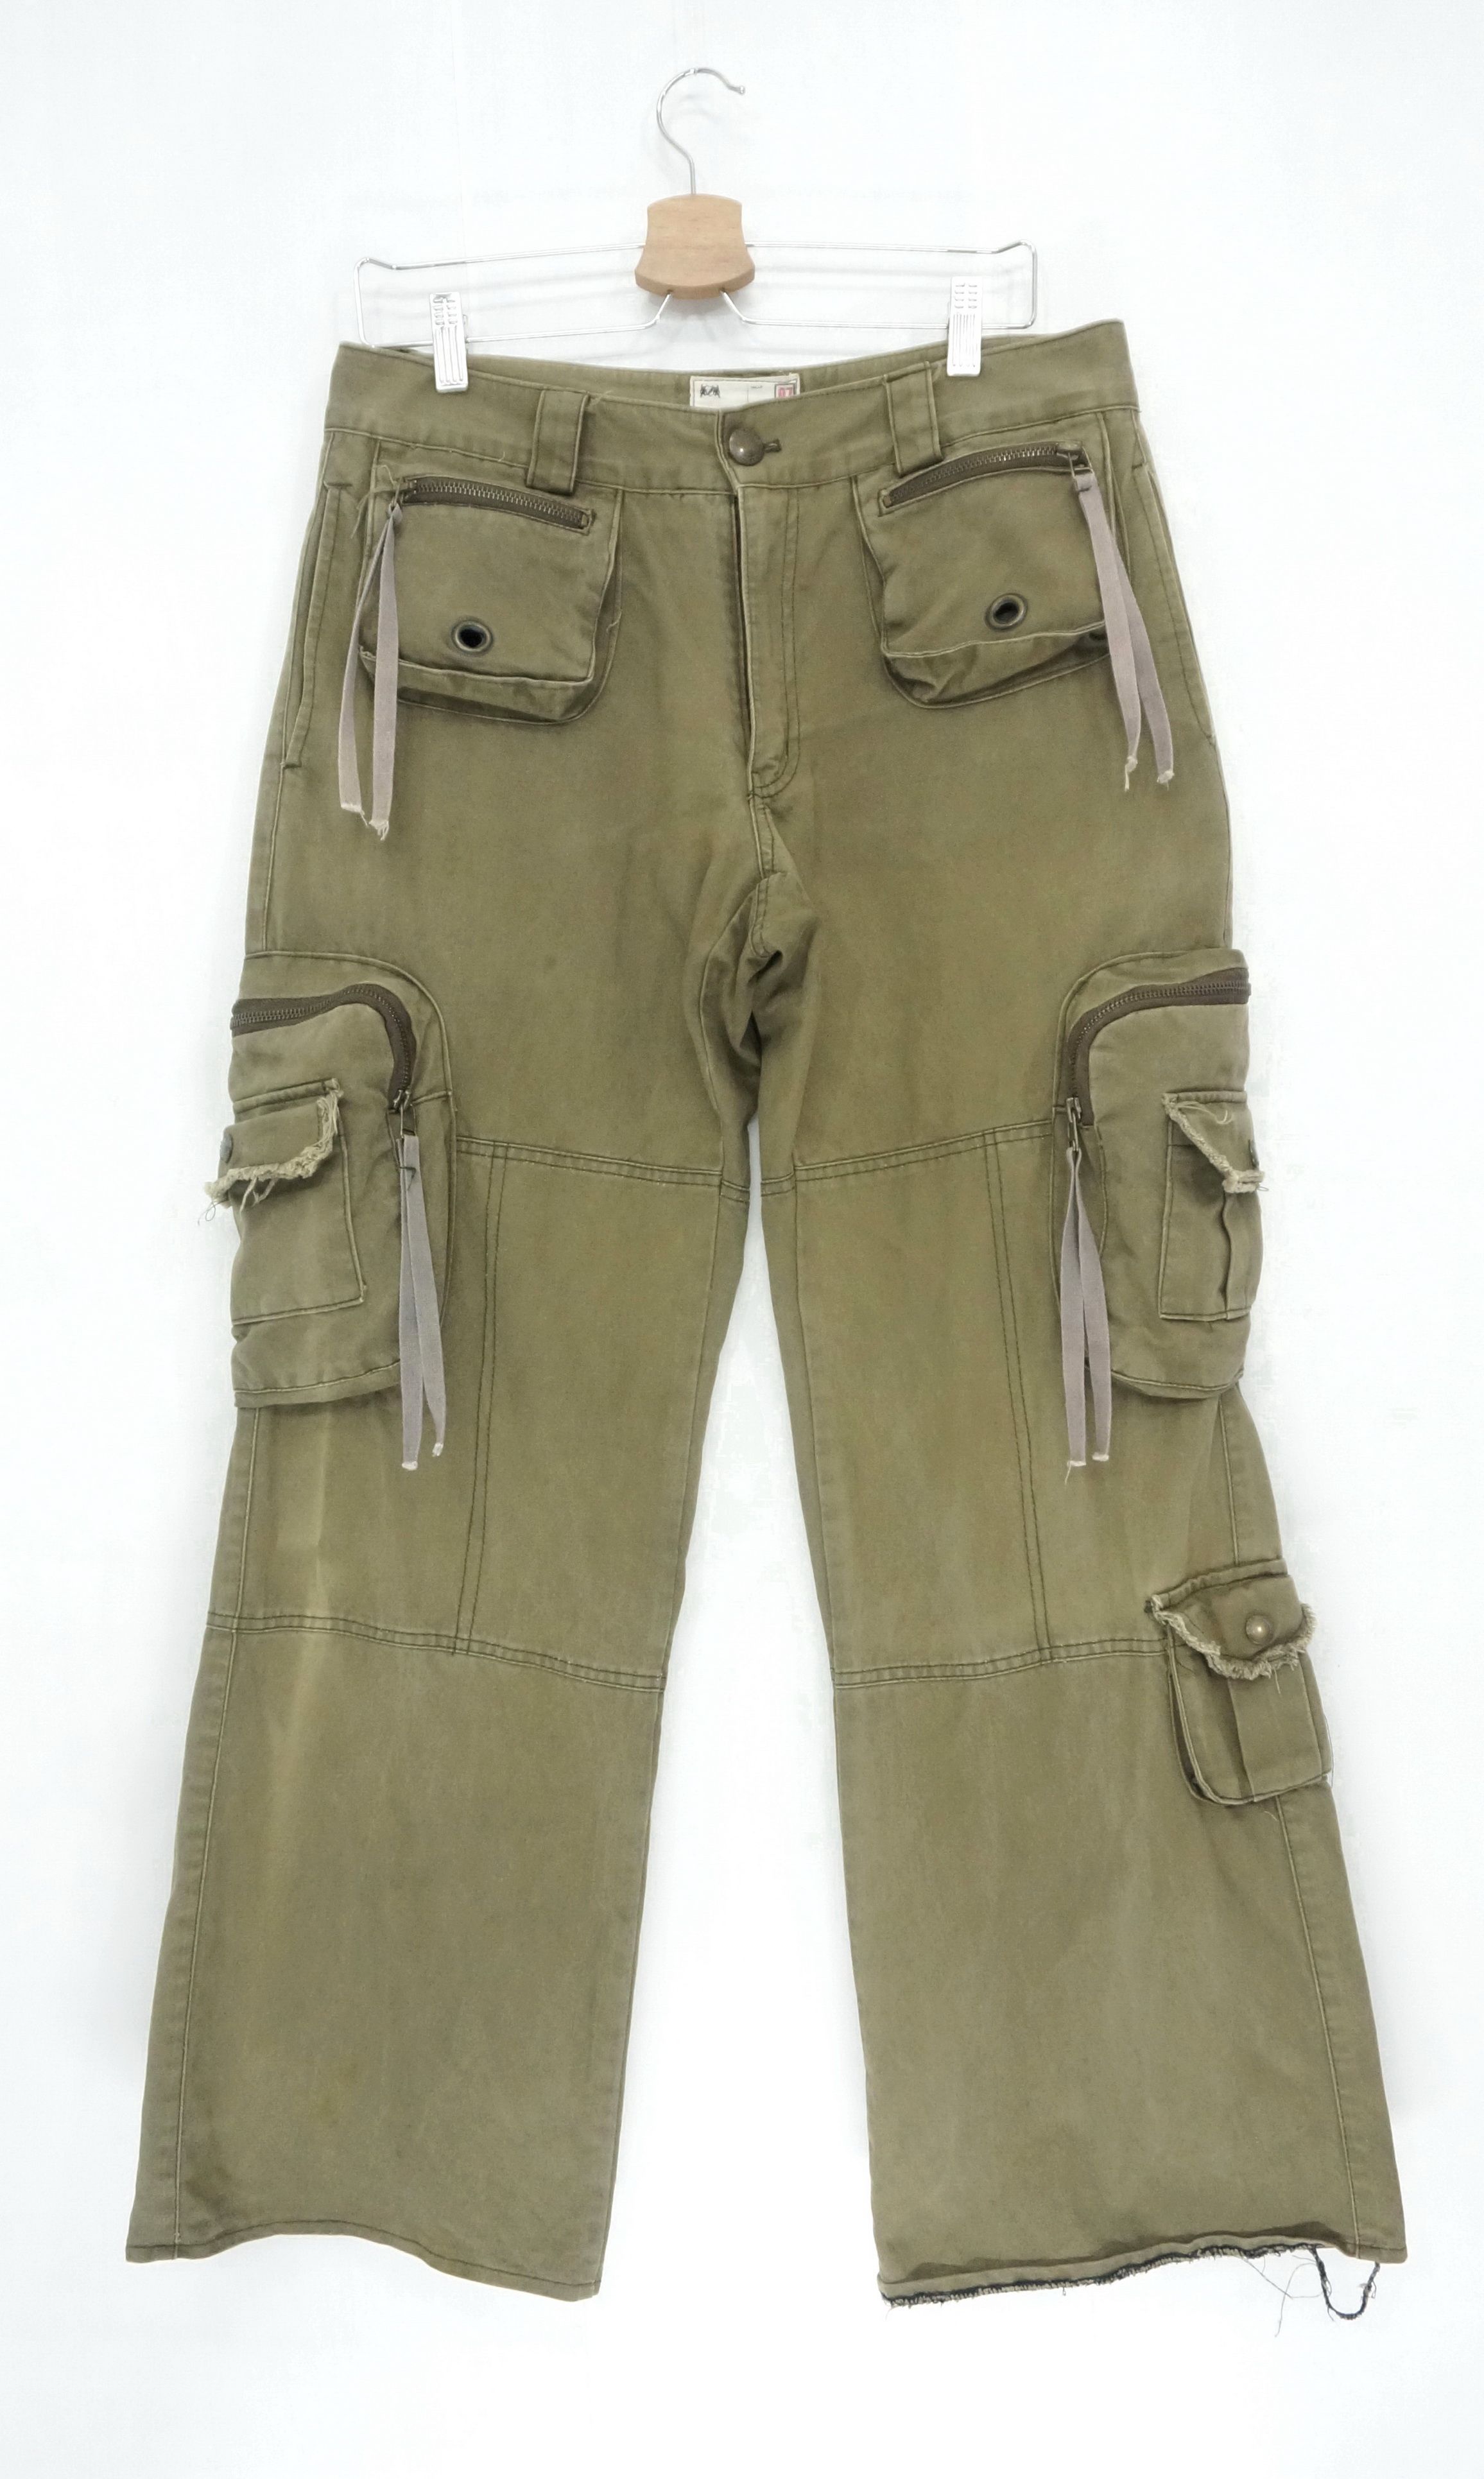 Pre-owned Japanese Brand Dopevtg! Siskeli Japan Wide Flared Worn Out 3d Cargo Pants In Dusty Olive Green